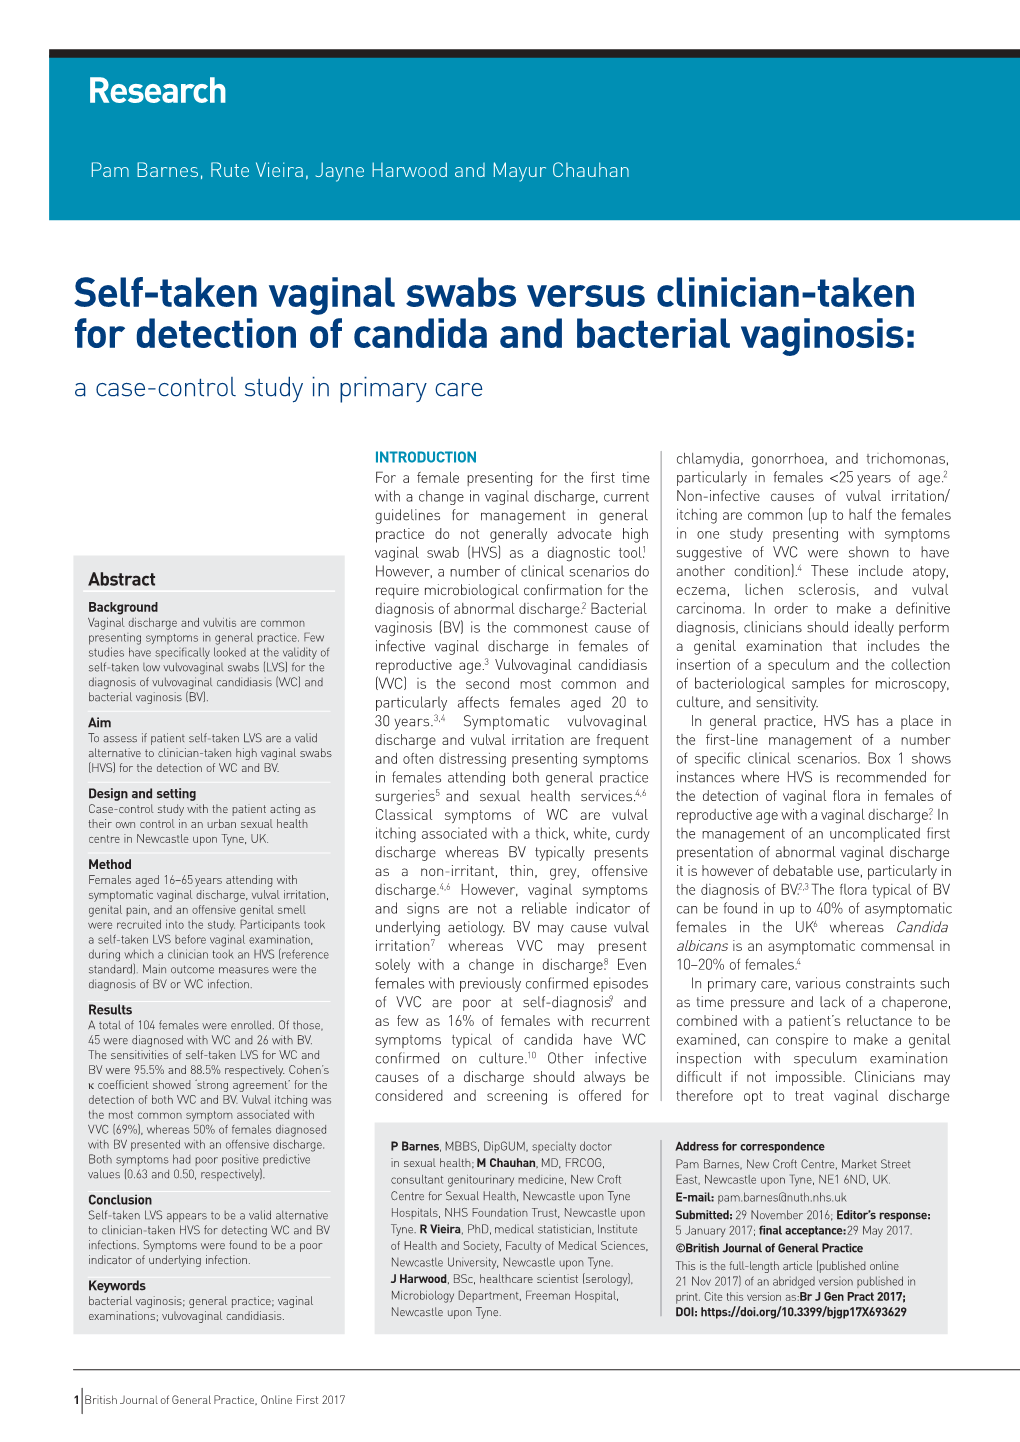 Self-Taken Vaginal Swabs Versus Clinician-Taken for Detection of Candida and Bacterial Vaginosis: a Case-Control Study in Primary Care